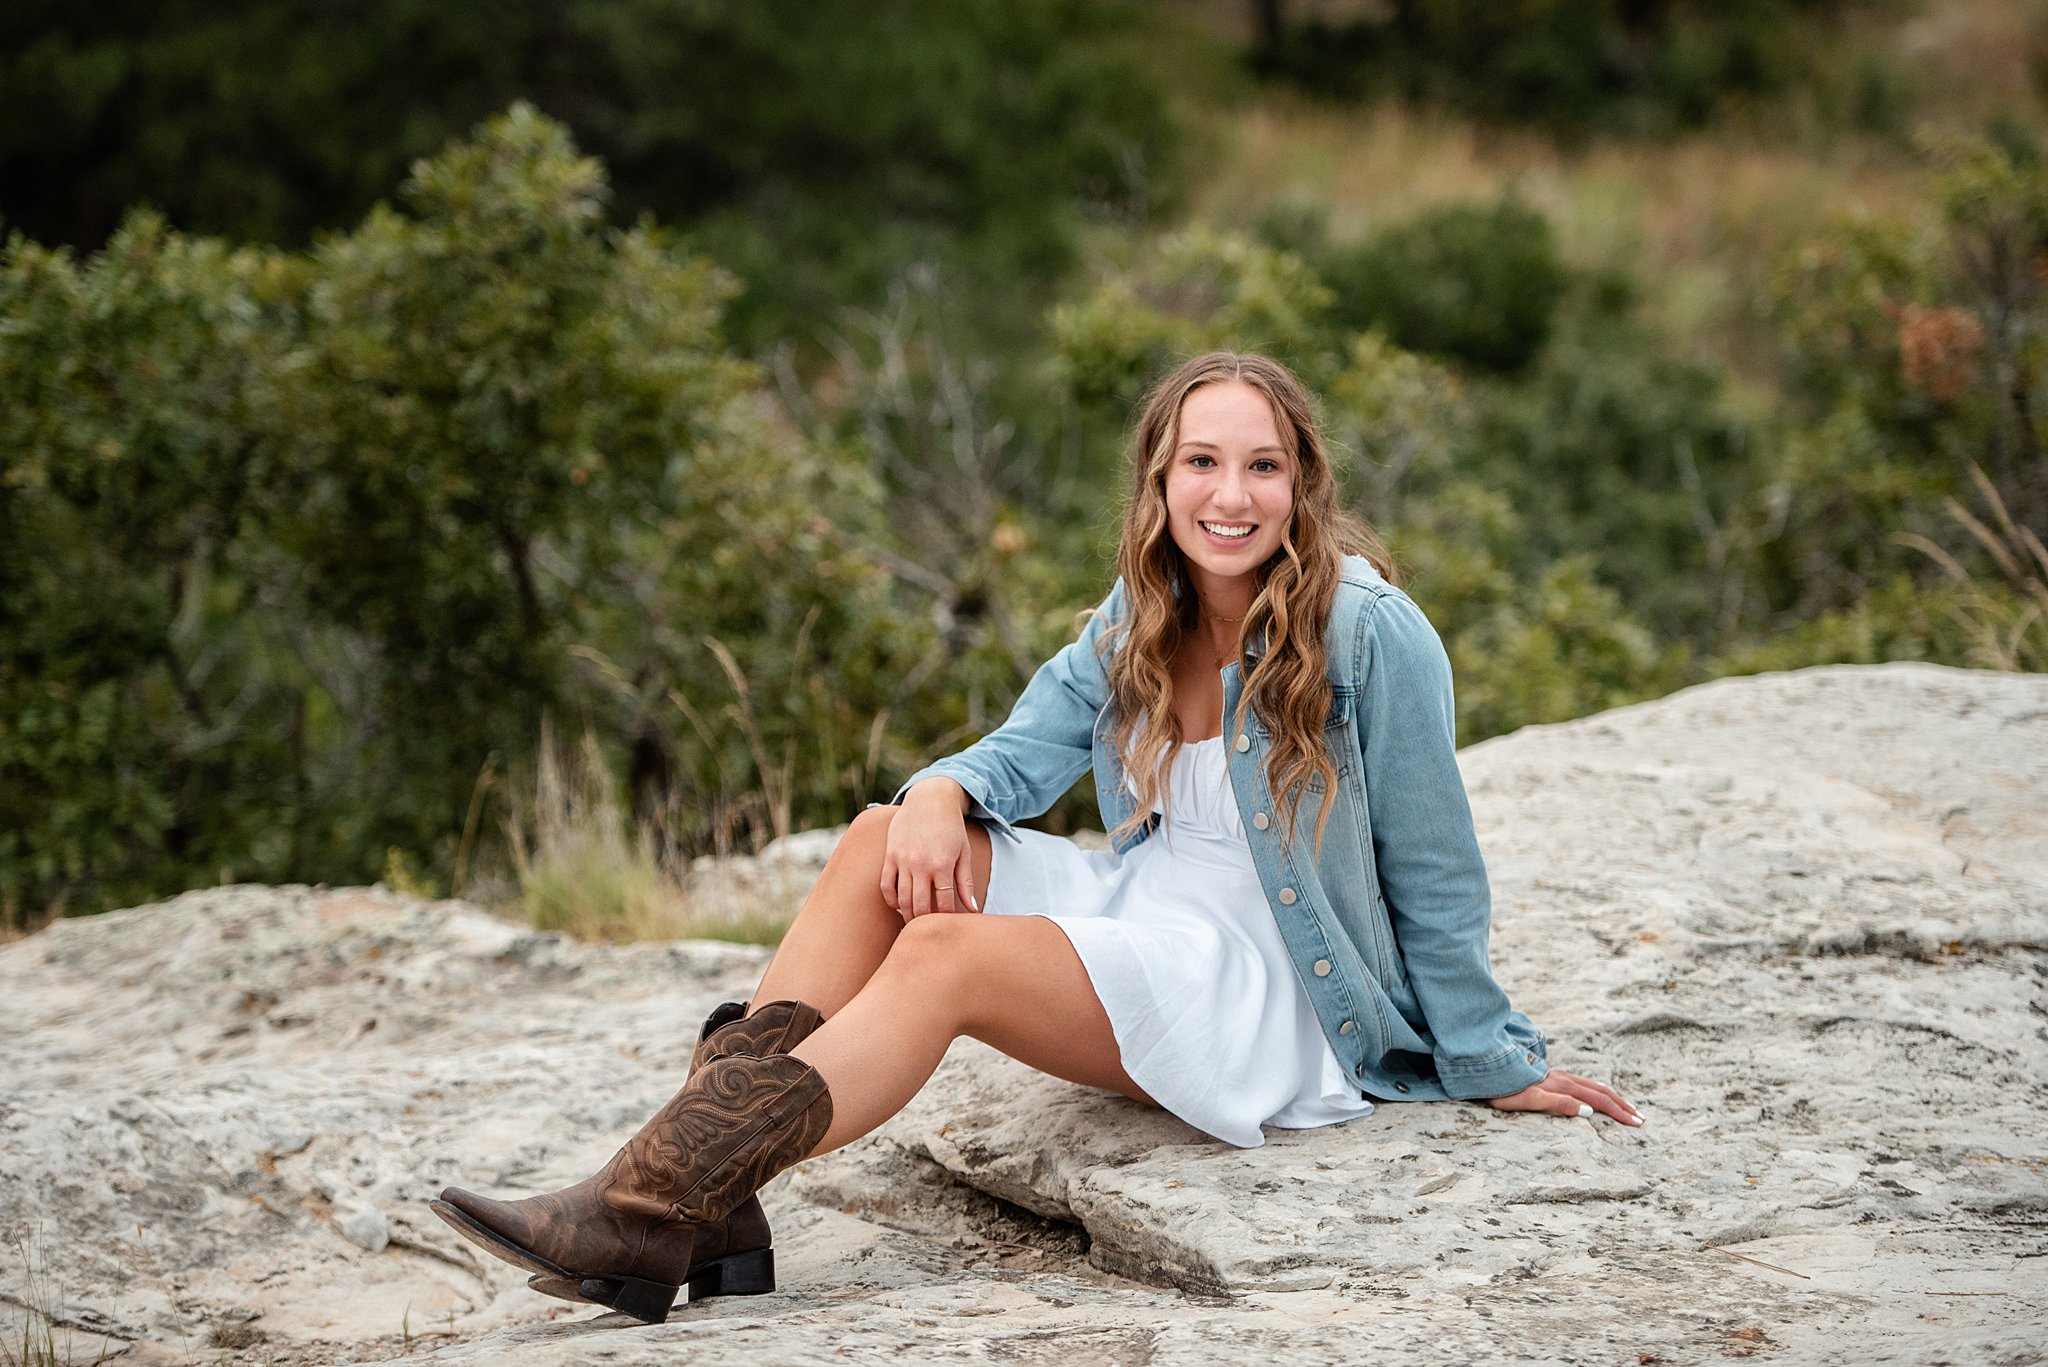 A high school senior in cowboy boots, a white dress and jean jacket sits on a large rock